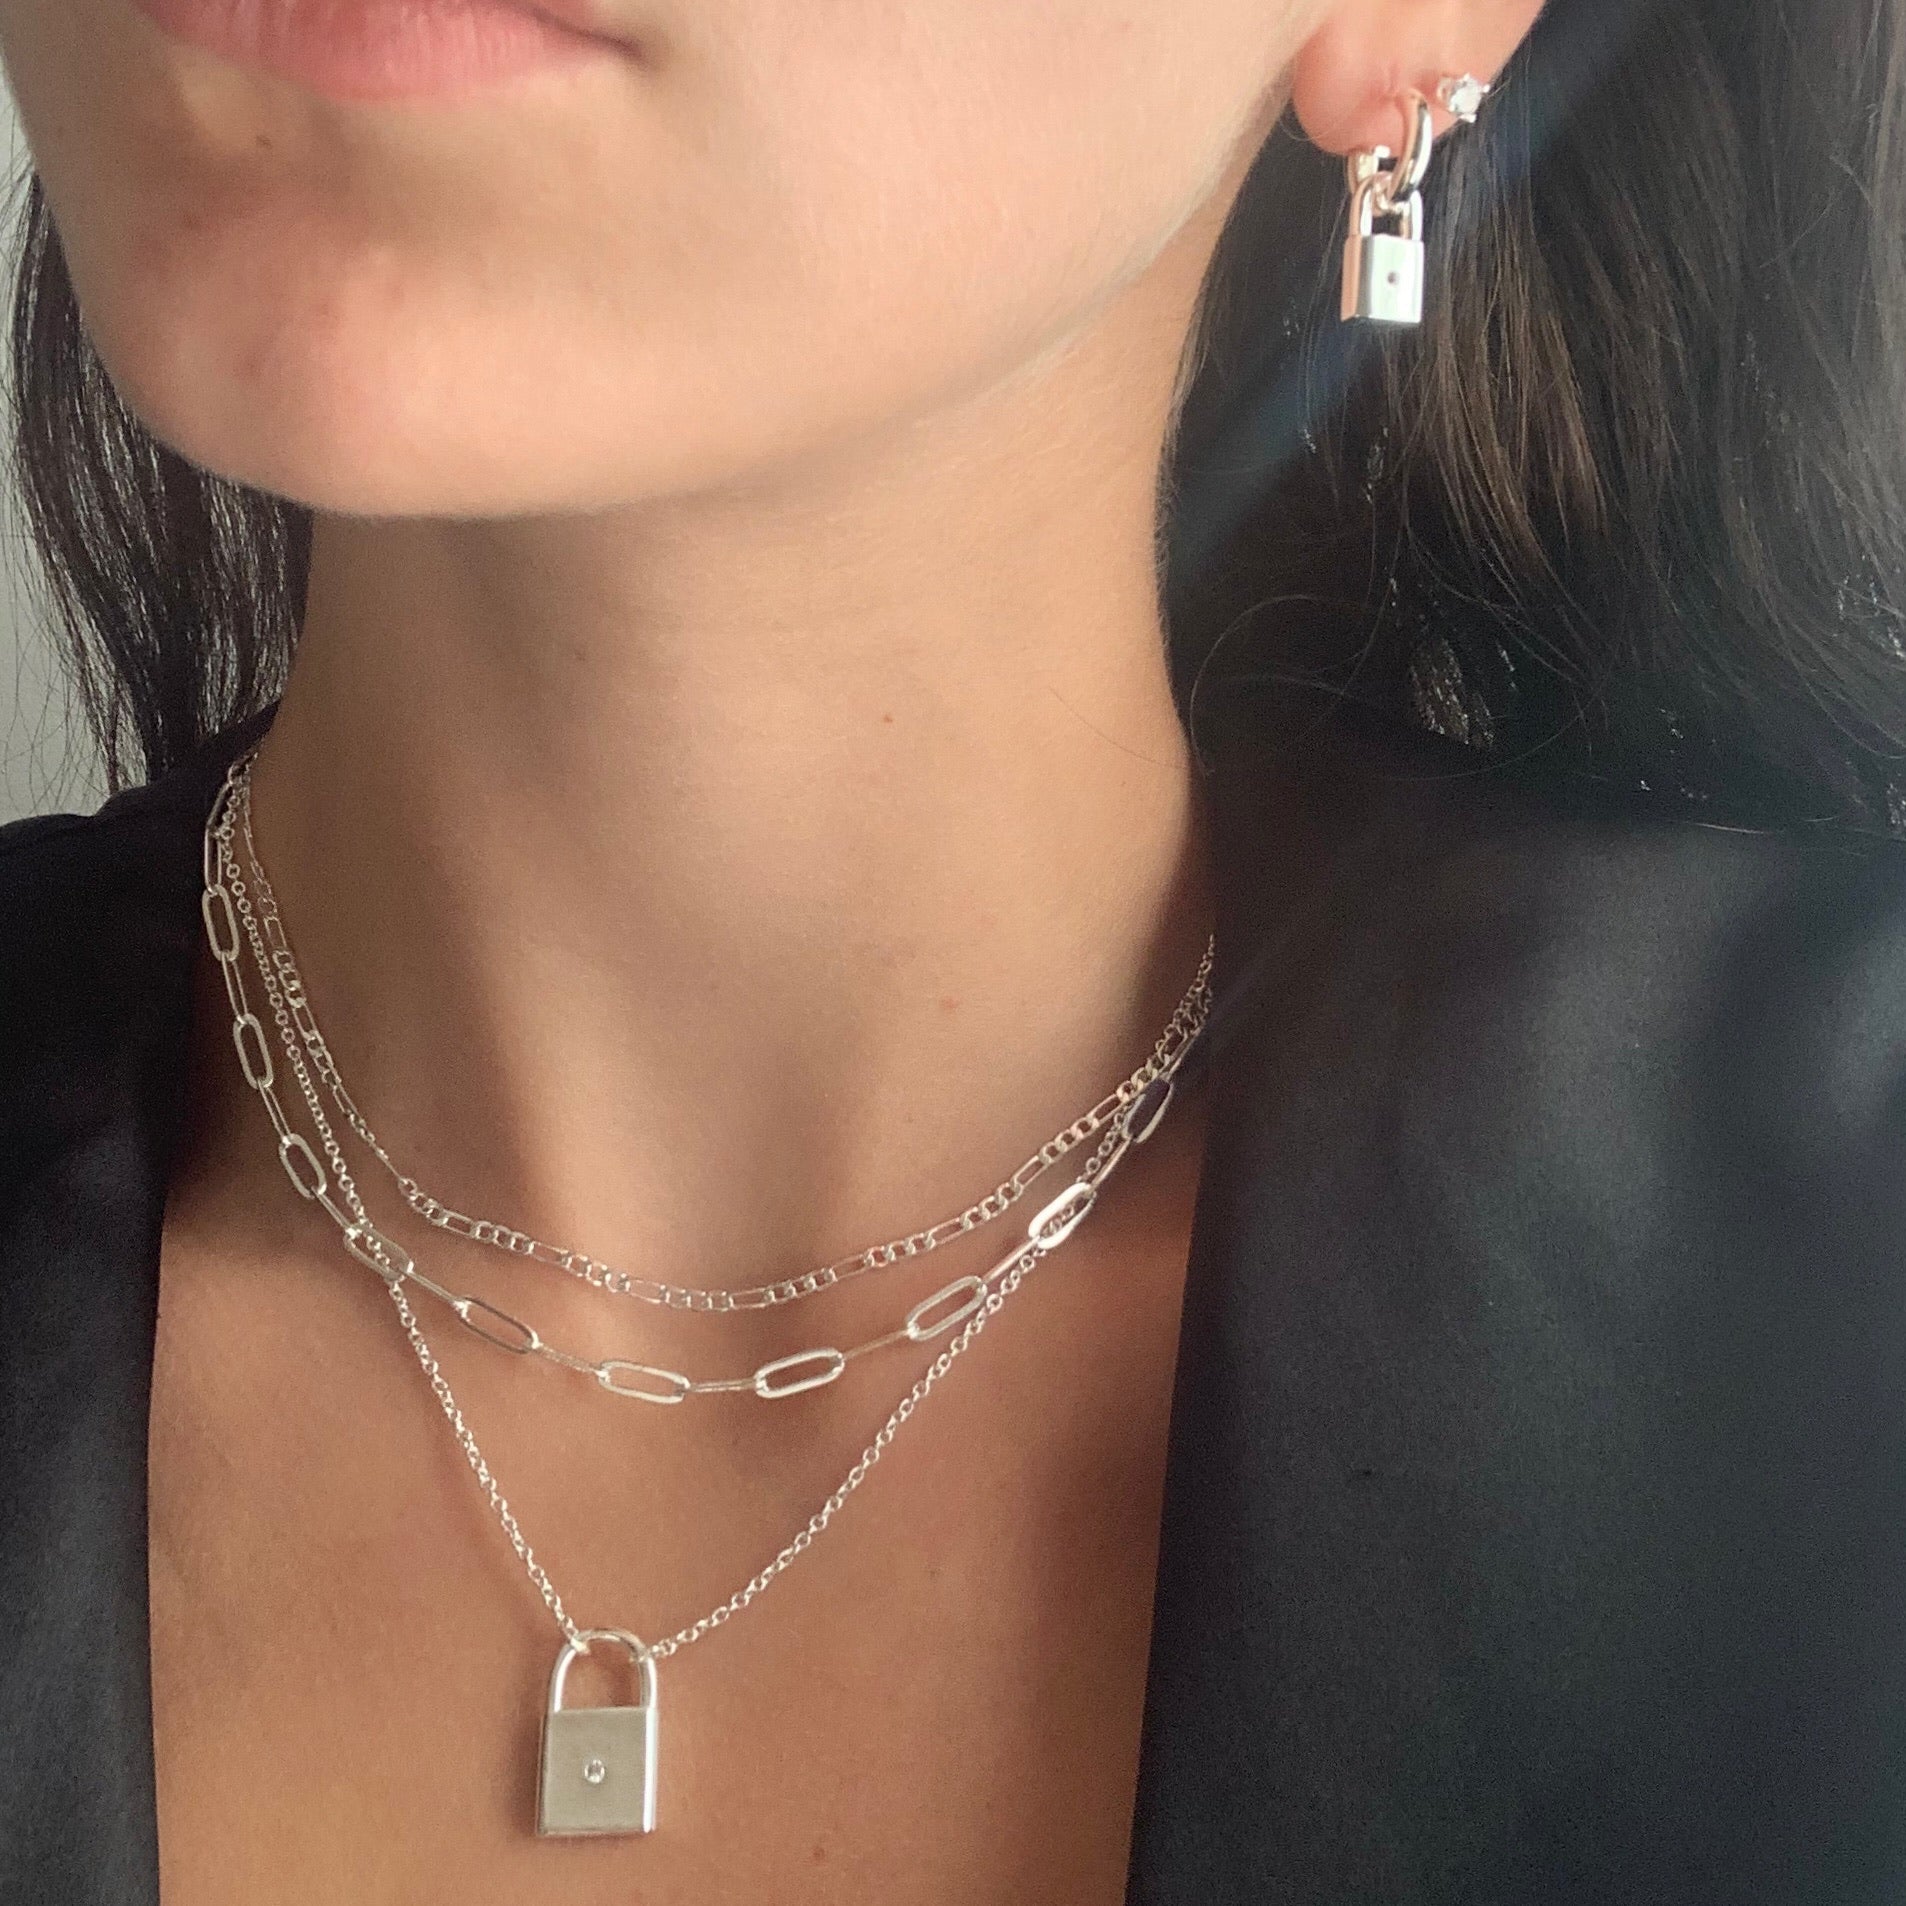 lv in the sky necklace